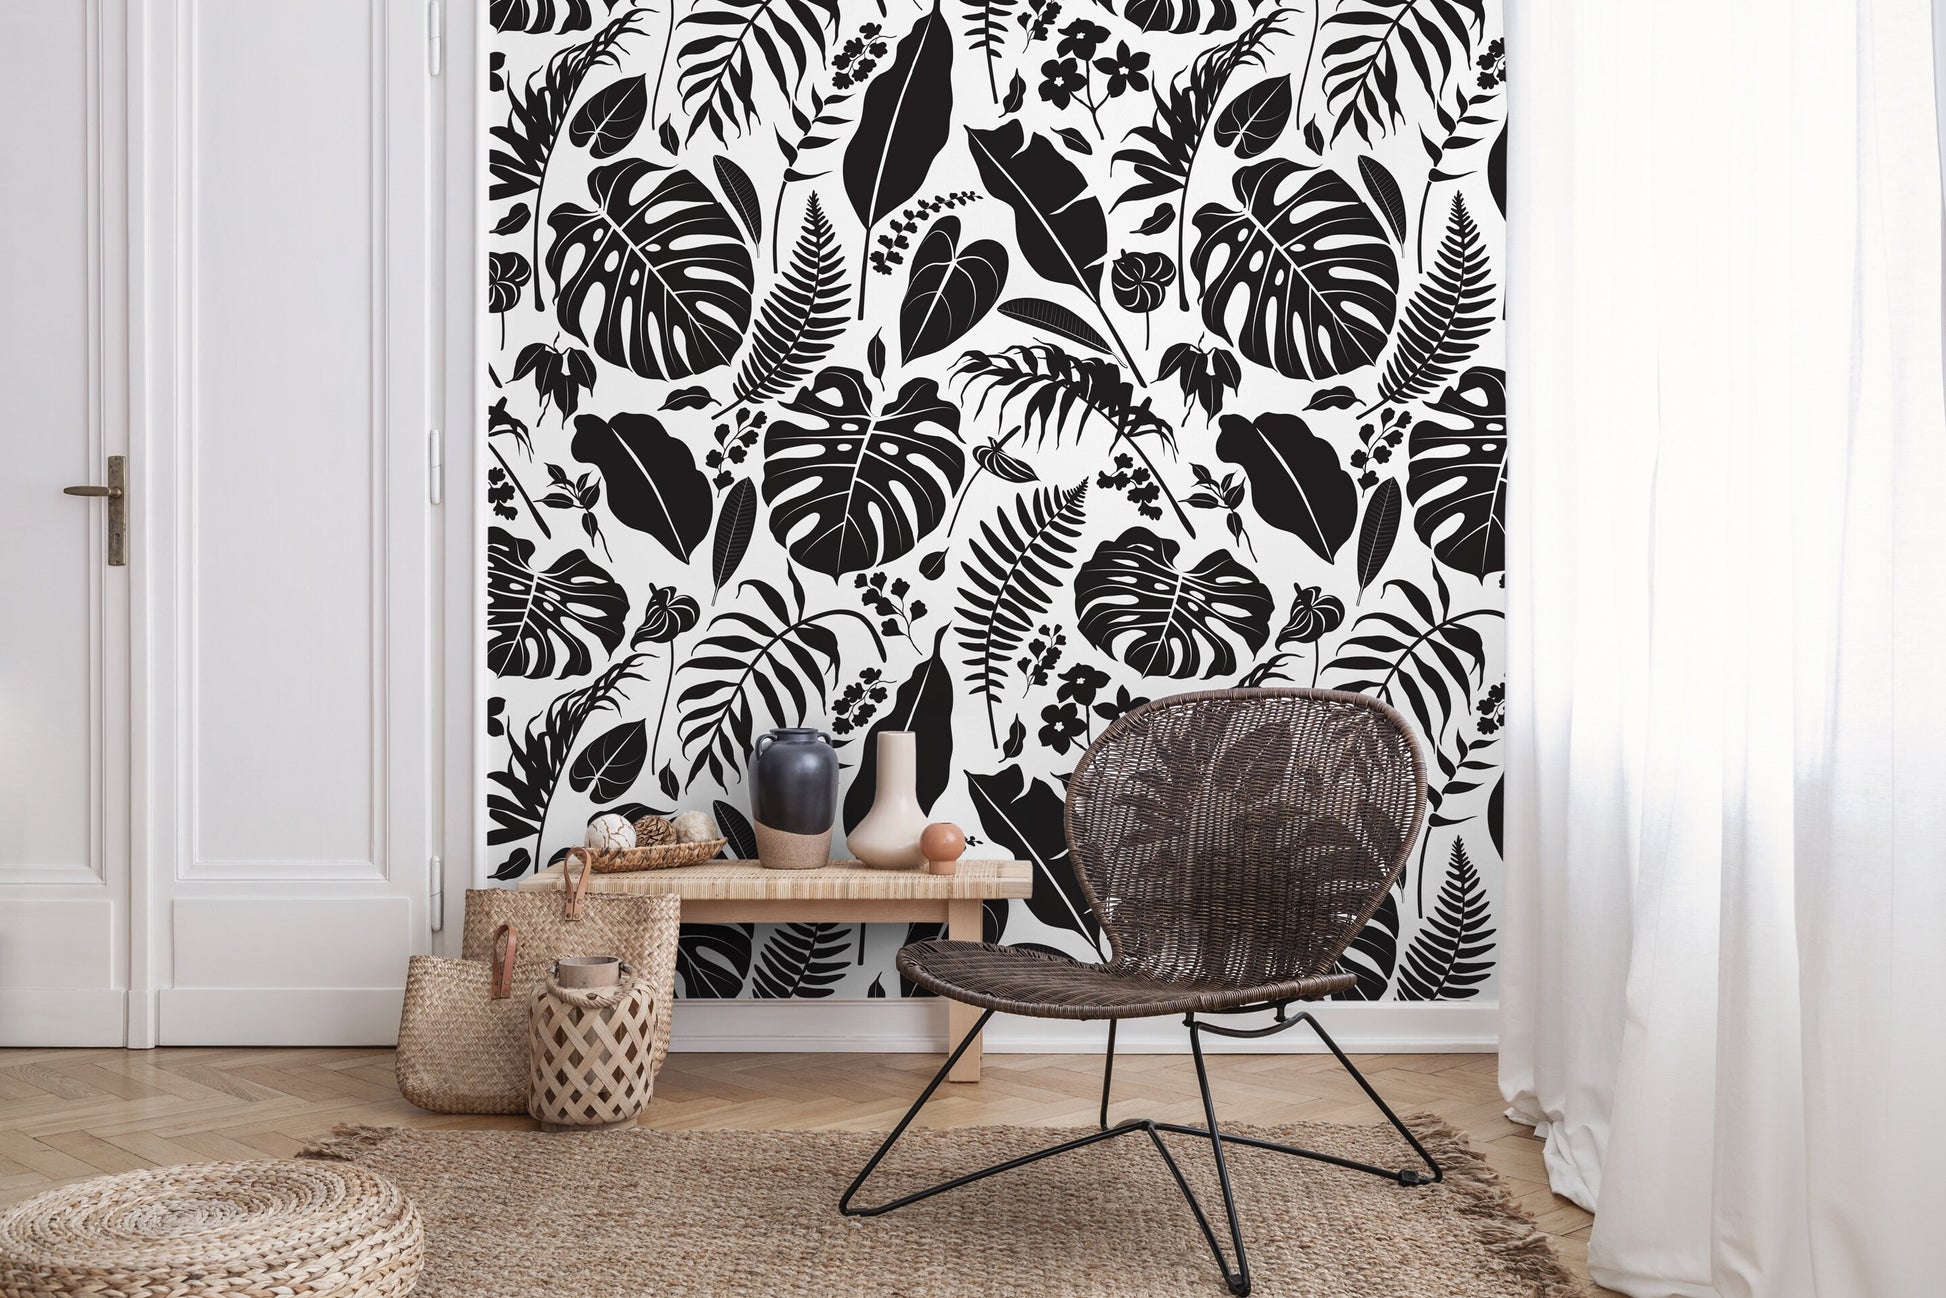 Wallpaper Peel and Stick Wallpaper Removable Wallpaper Home Decor Wall Art Wall Decor Room Decor / Black and White Leaves Wallpaper - C439